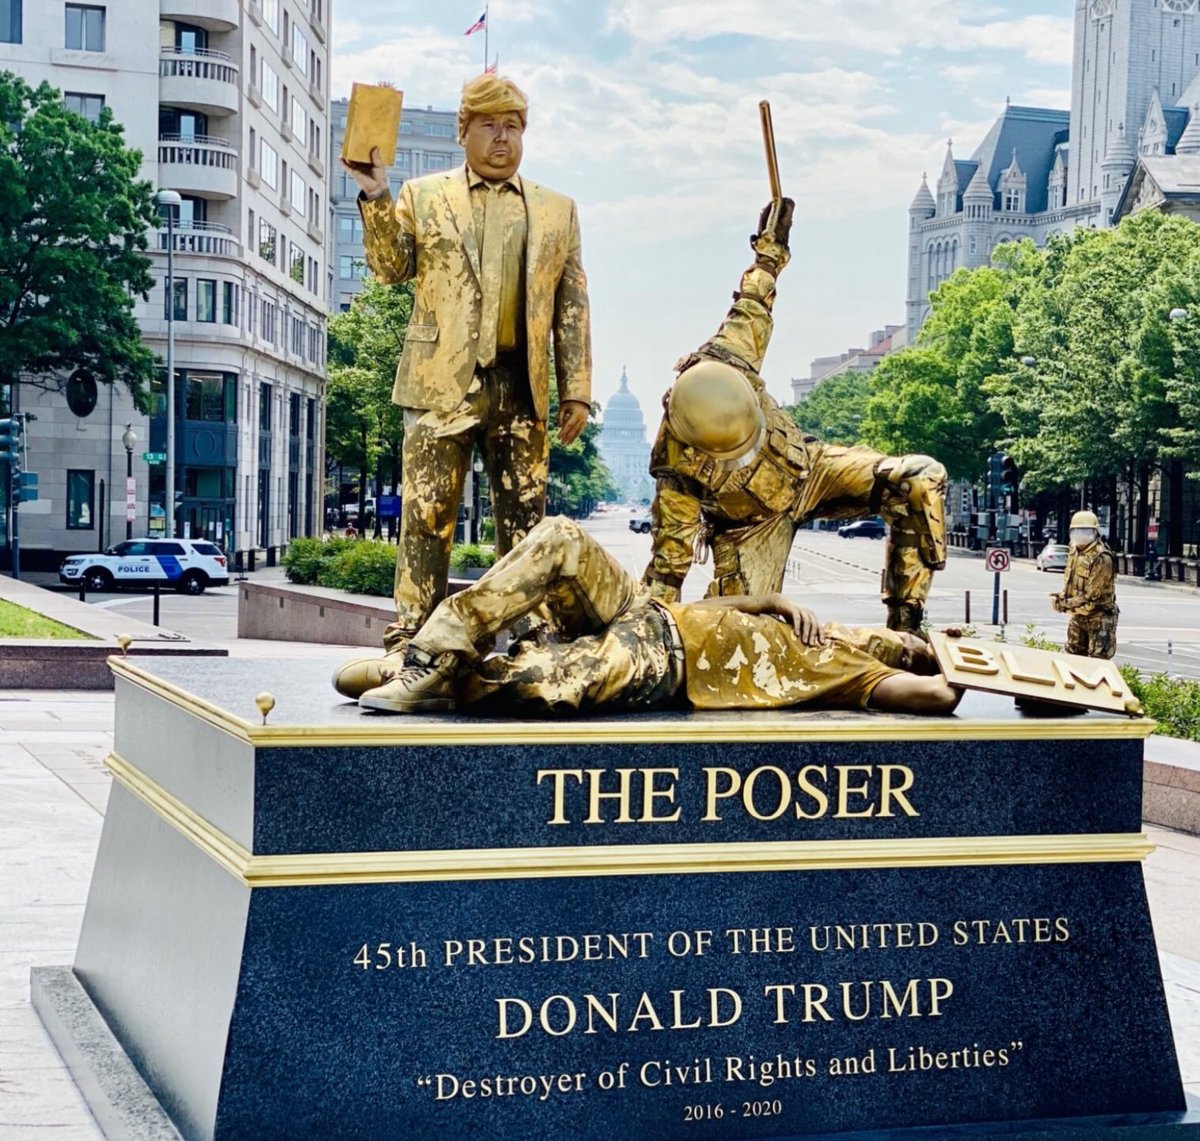 Have you seen these cool Trump statues using live actors, going up in D.C? They were put there by Director Bryan Buckley under the Trump Statue Initiative. The first one depicts Trump holding a bible while a BLM protester is being beaten by someone in full combat gear. (1/3)